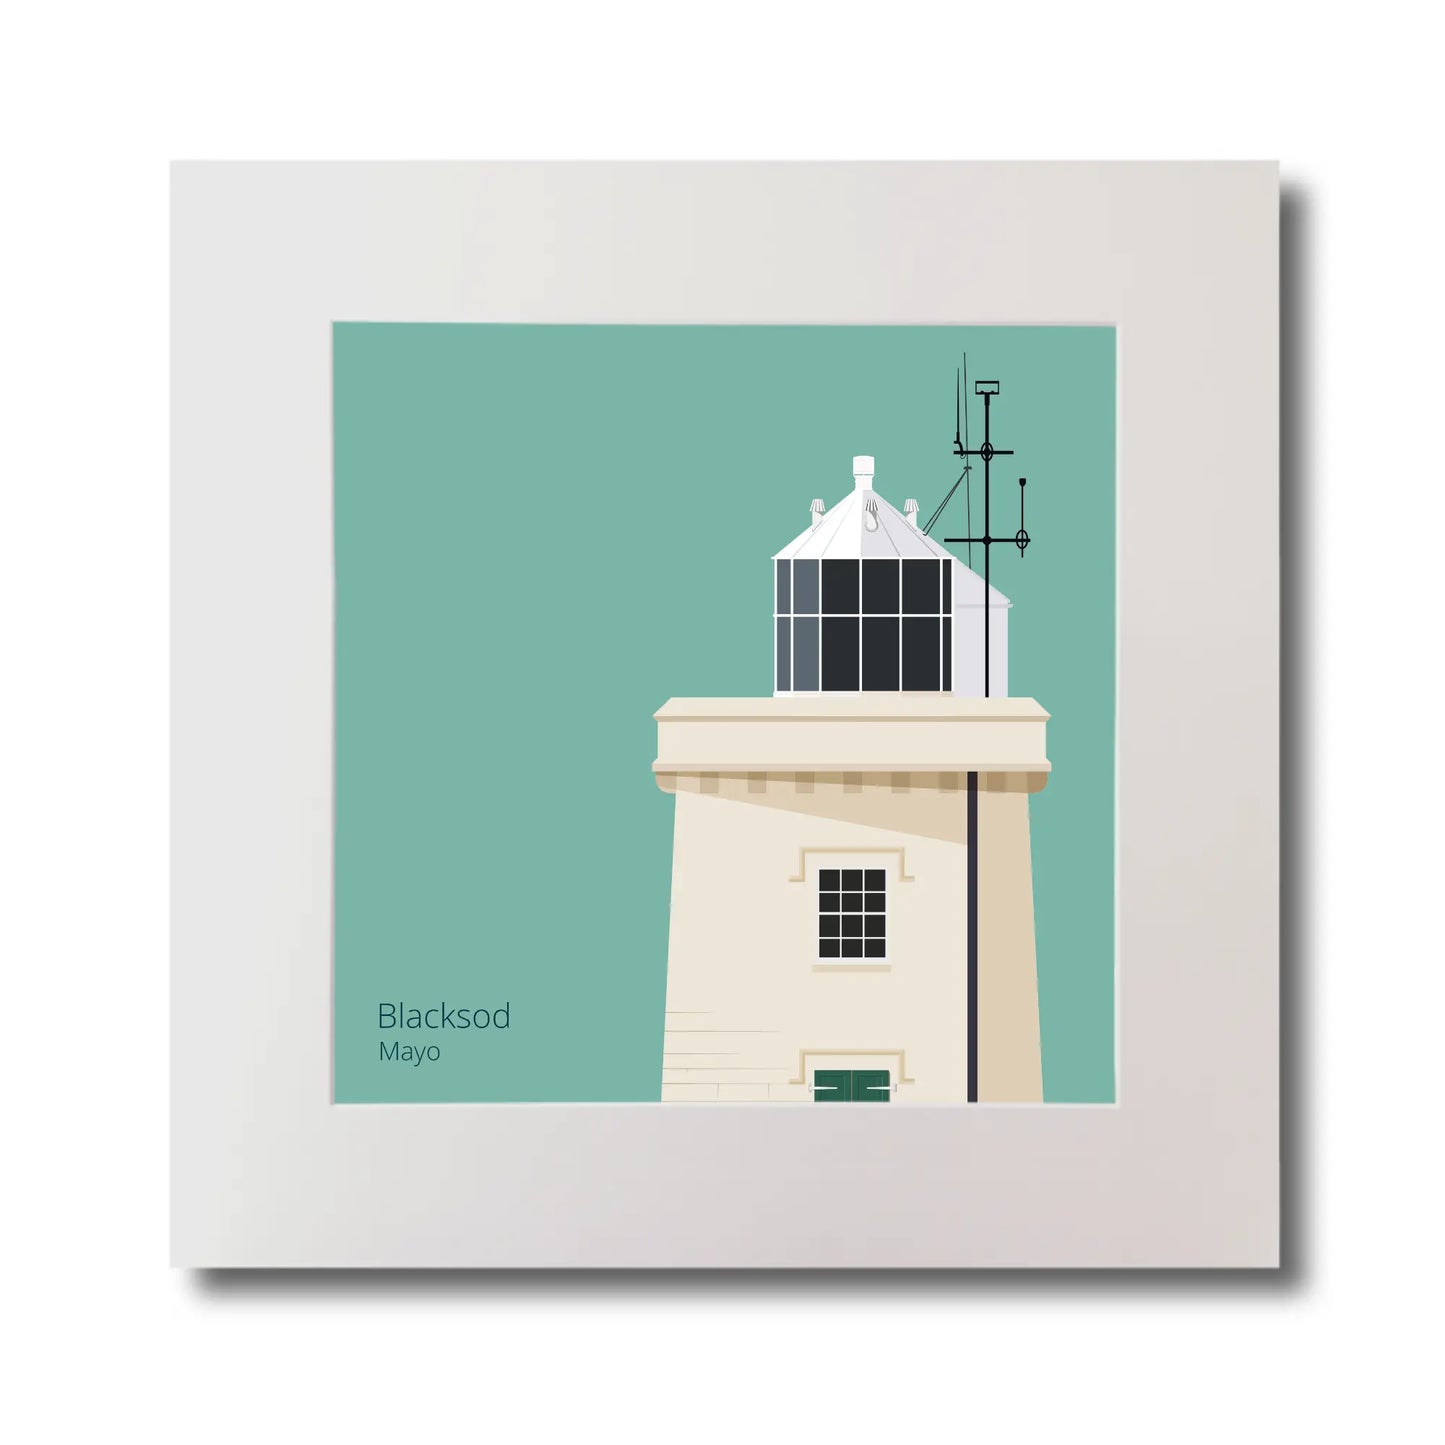 Illustration of Blacksod lighthouse on an ocean green background, mounted and measuring 30x30cm.